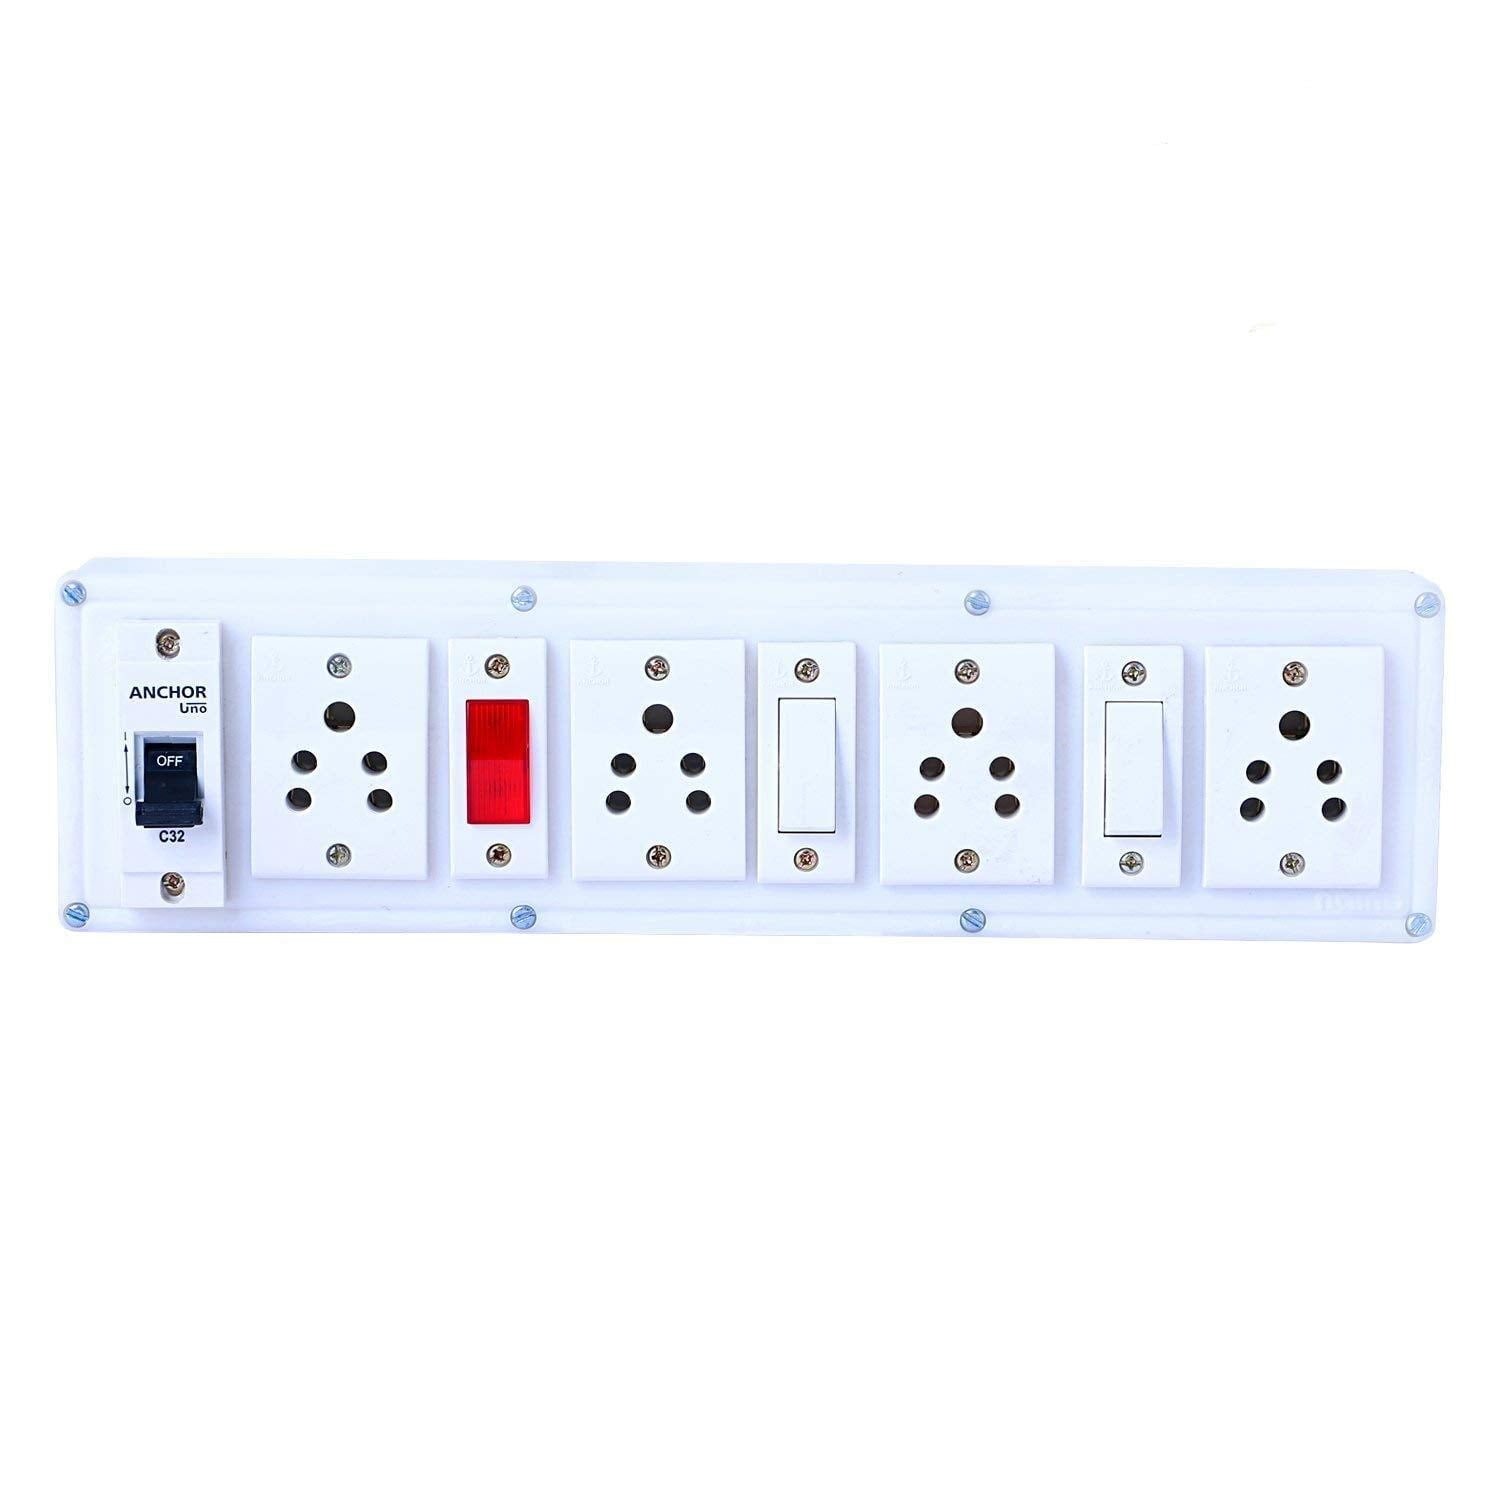 INDRICO Extension Multi Outlet Board 2 Anchor Switches and 4 Anchor Socket,1 Indicator and 1 MCB